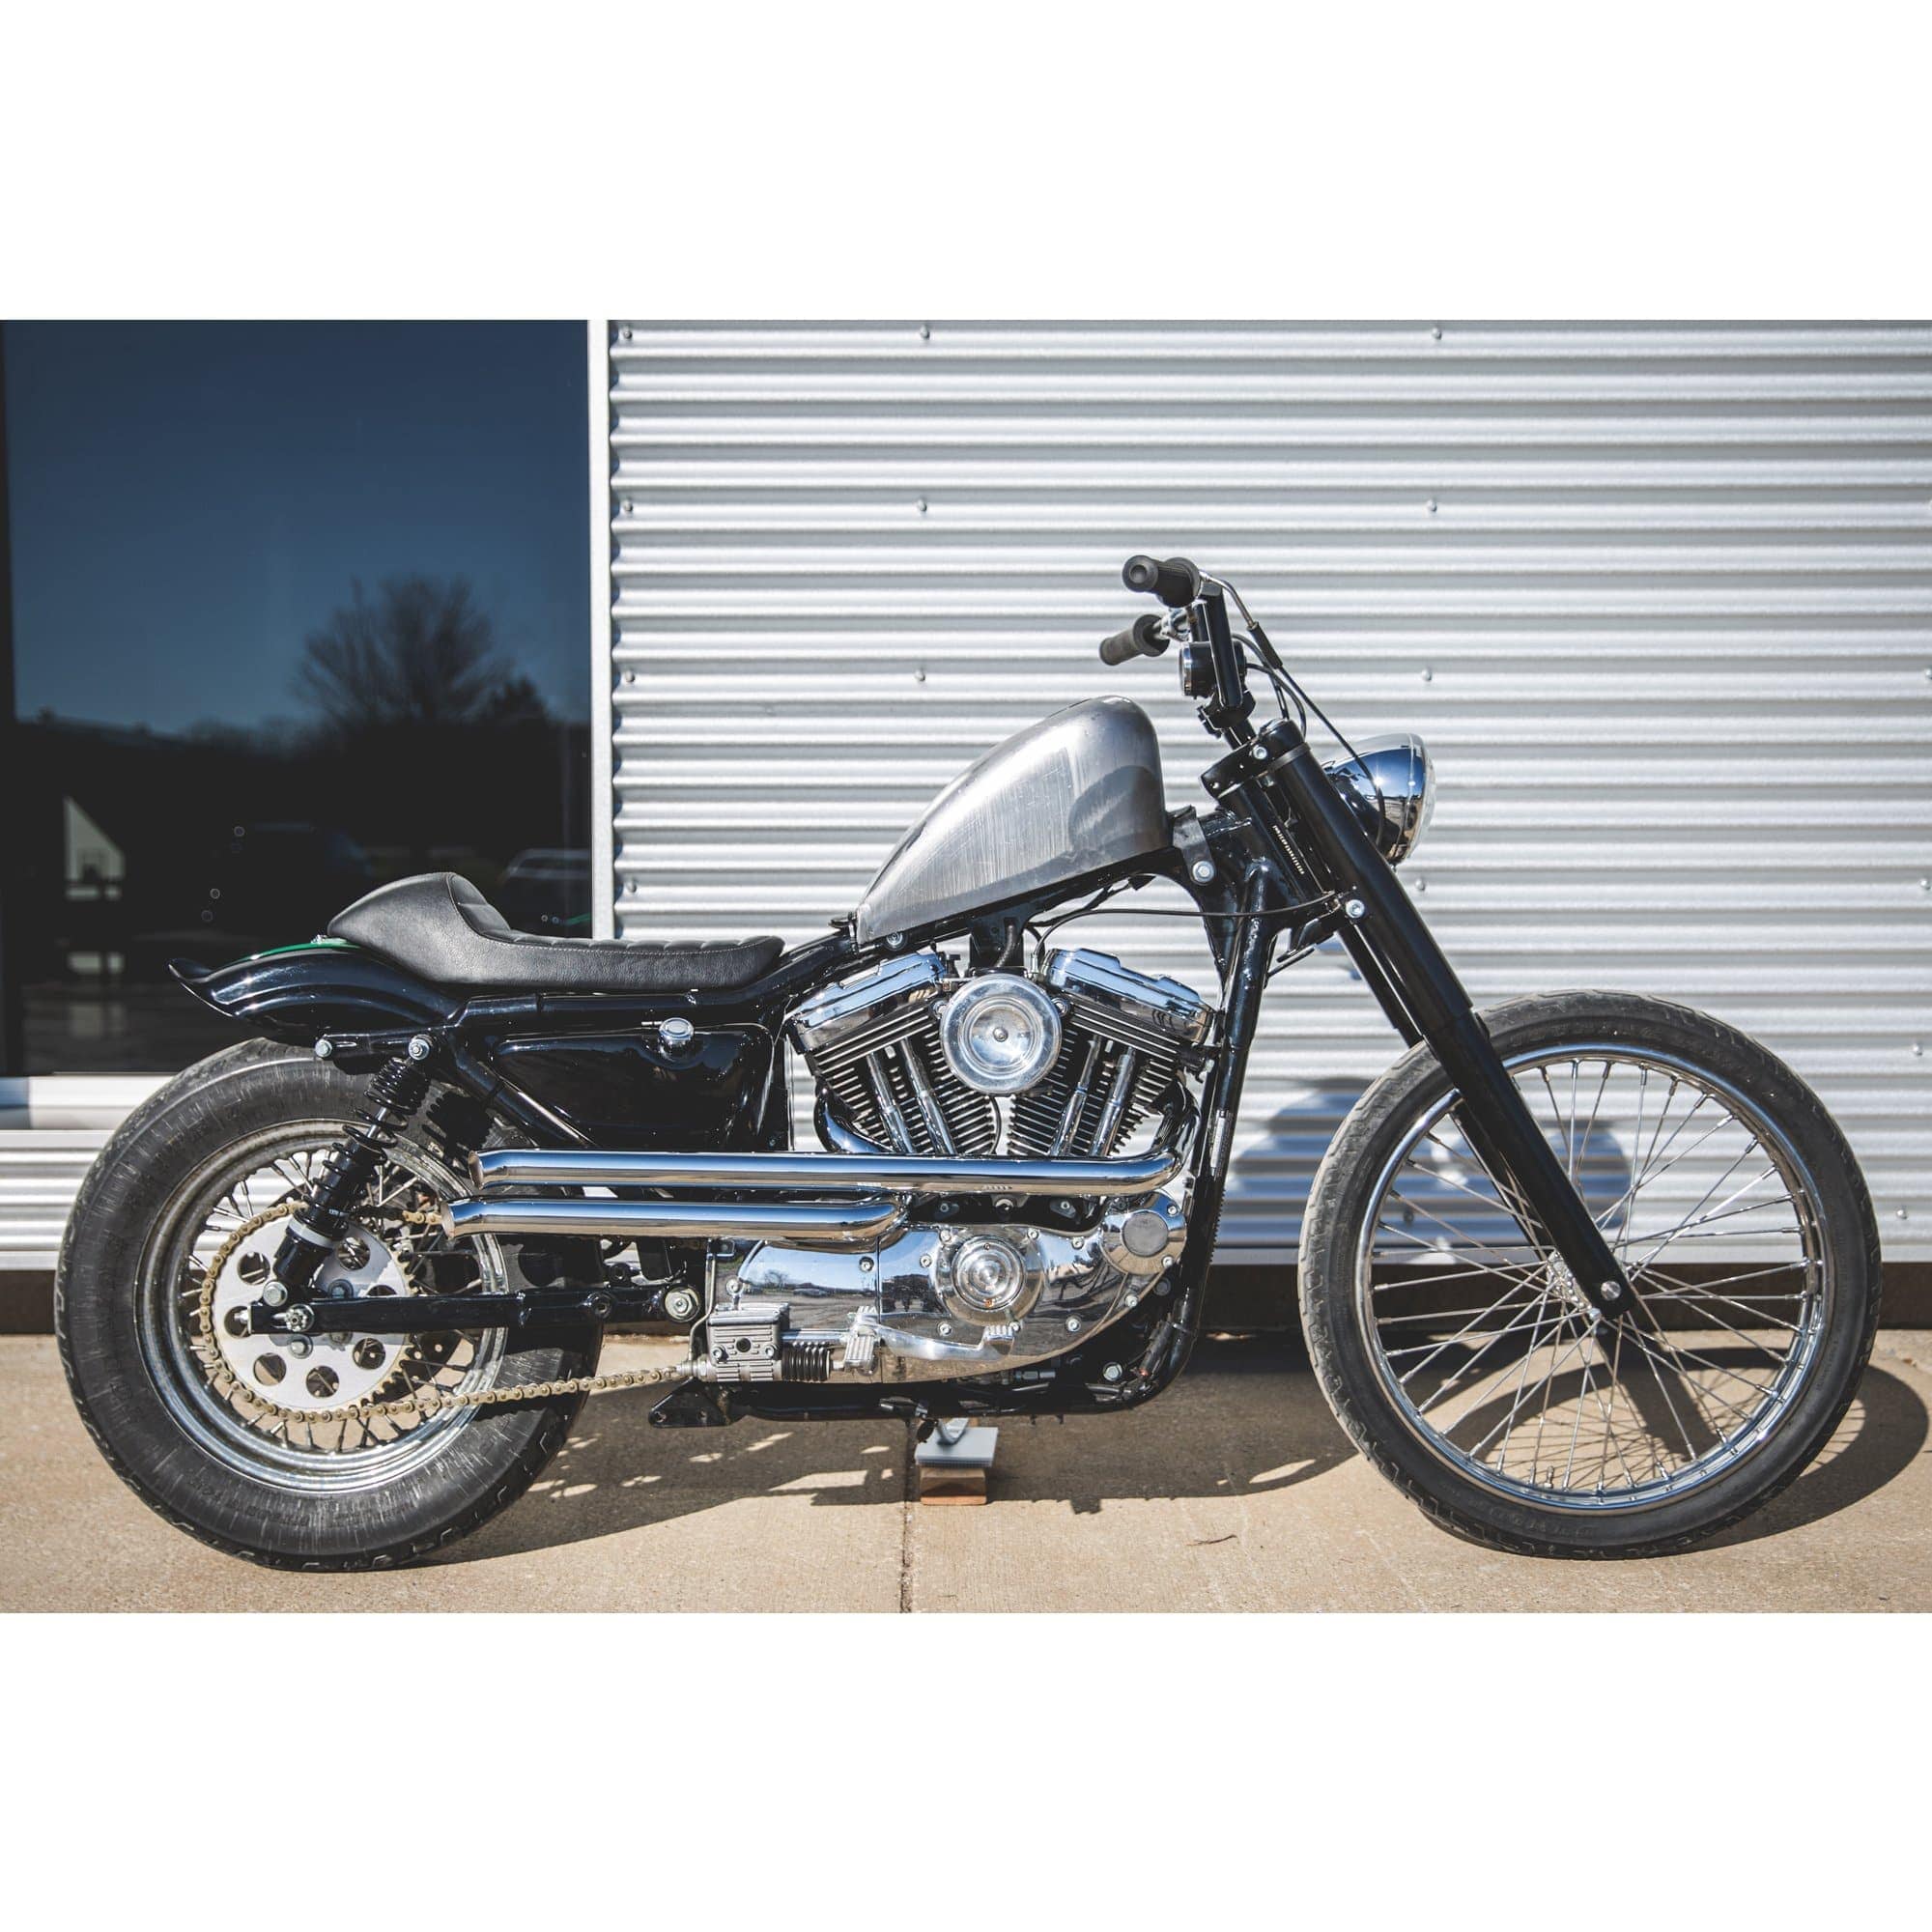 EFI Fuel Injected Motorcycle Gas Tank Frisco Mount Shallow Tunnel 2.5 Gal  Sportster Bobber Style Harley Davidson Nightster Iron Low Forty Eight  SuperLow Chopper Custom XL 883 1200 XL883 XL1200 07-2020 